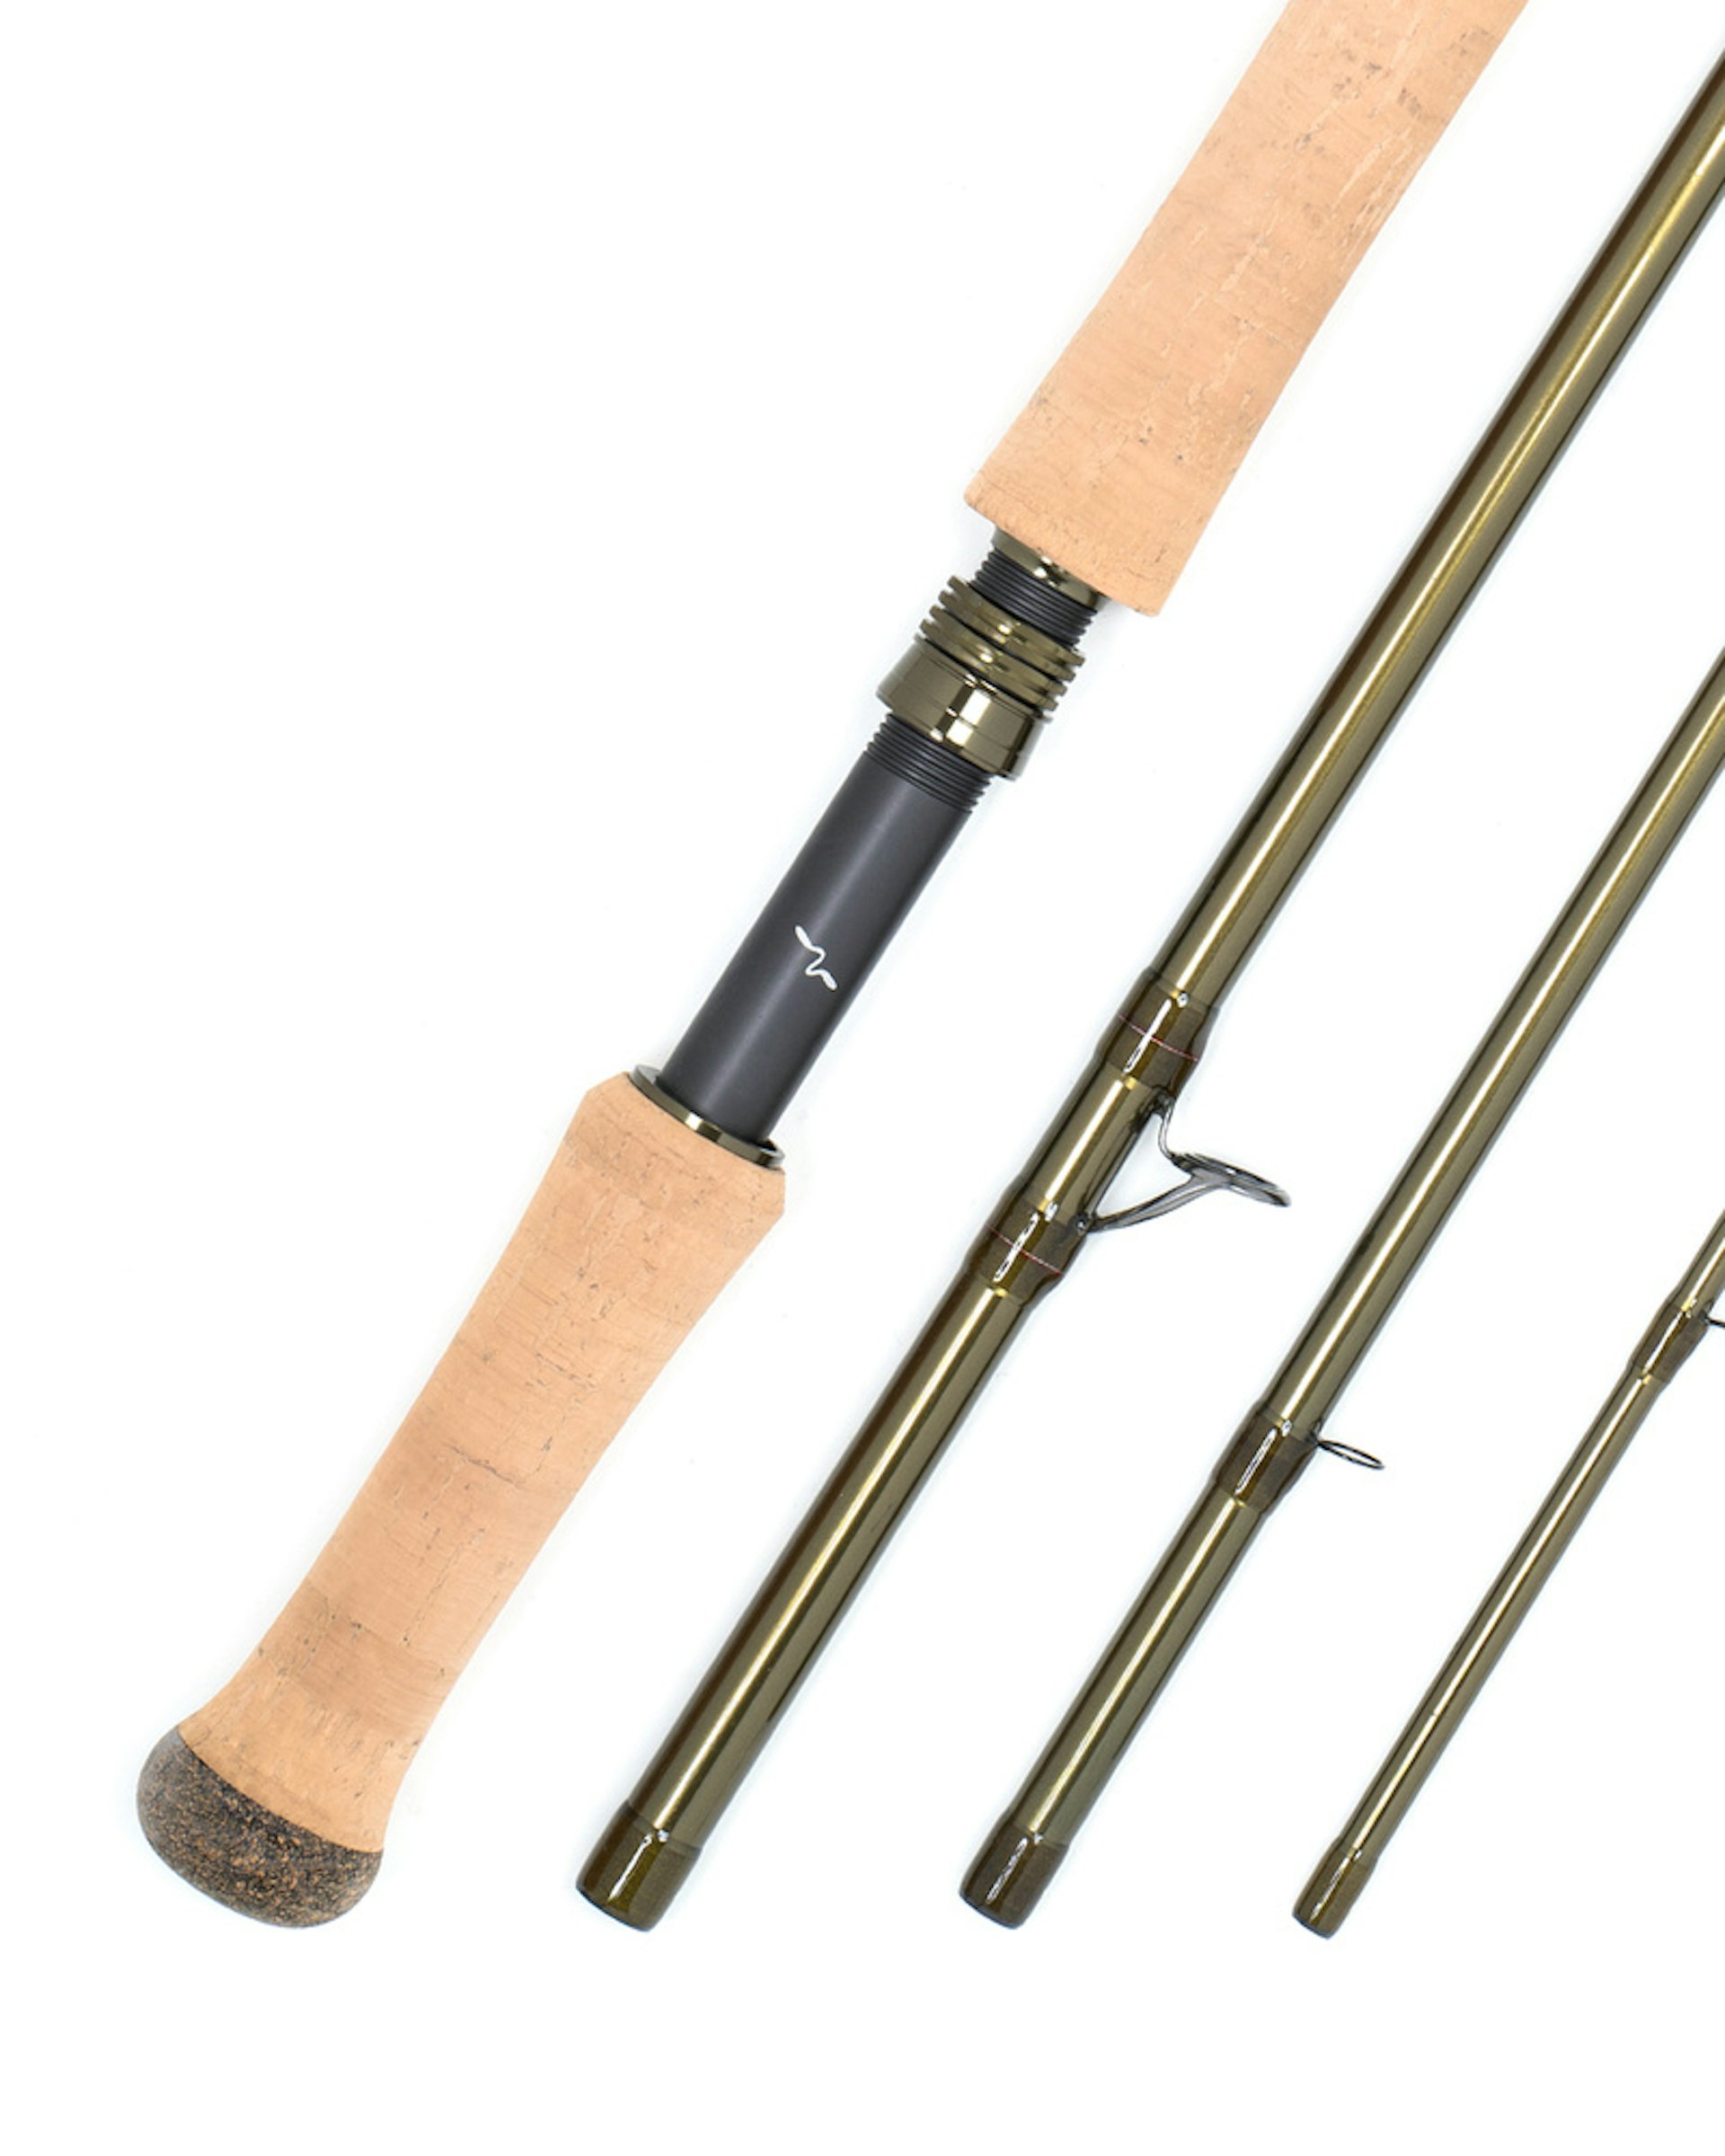 Double Hand Fly Rods - Salmon fly fishing rods